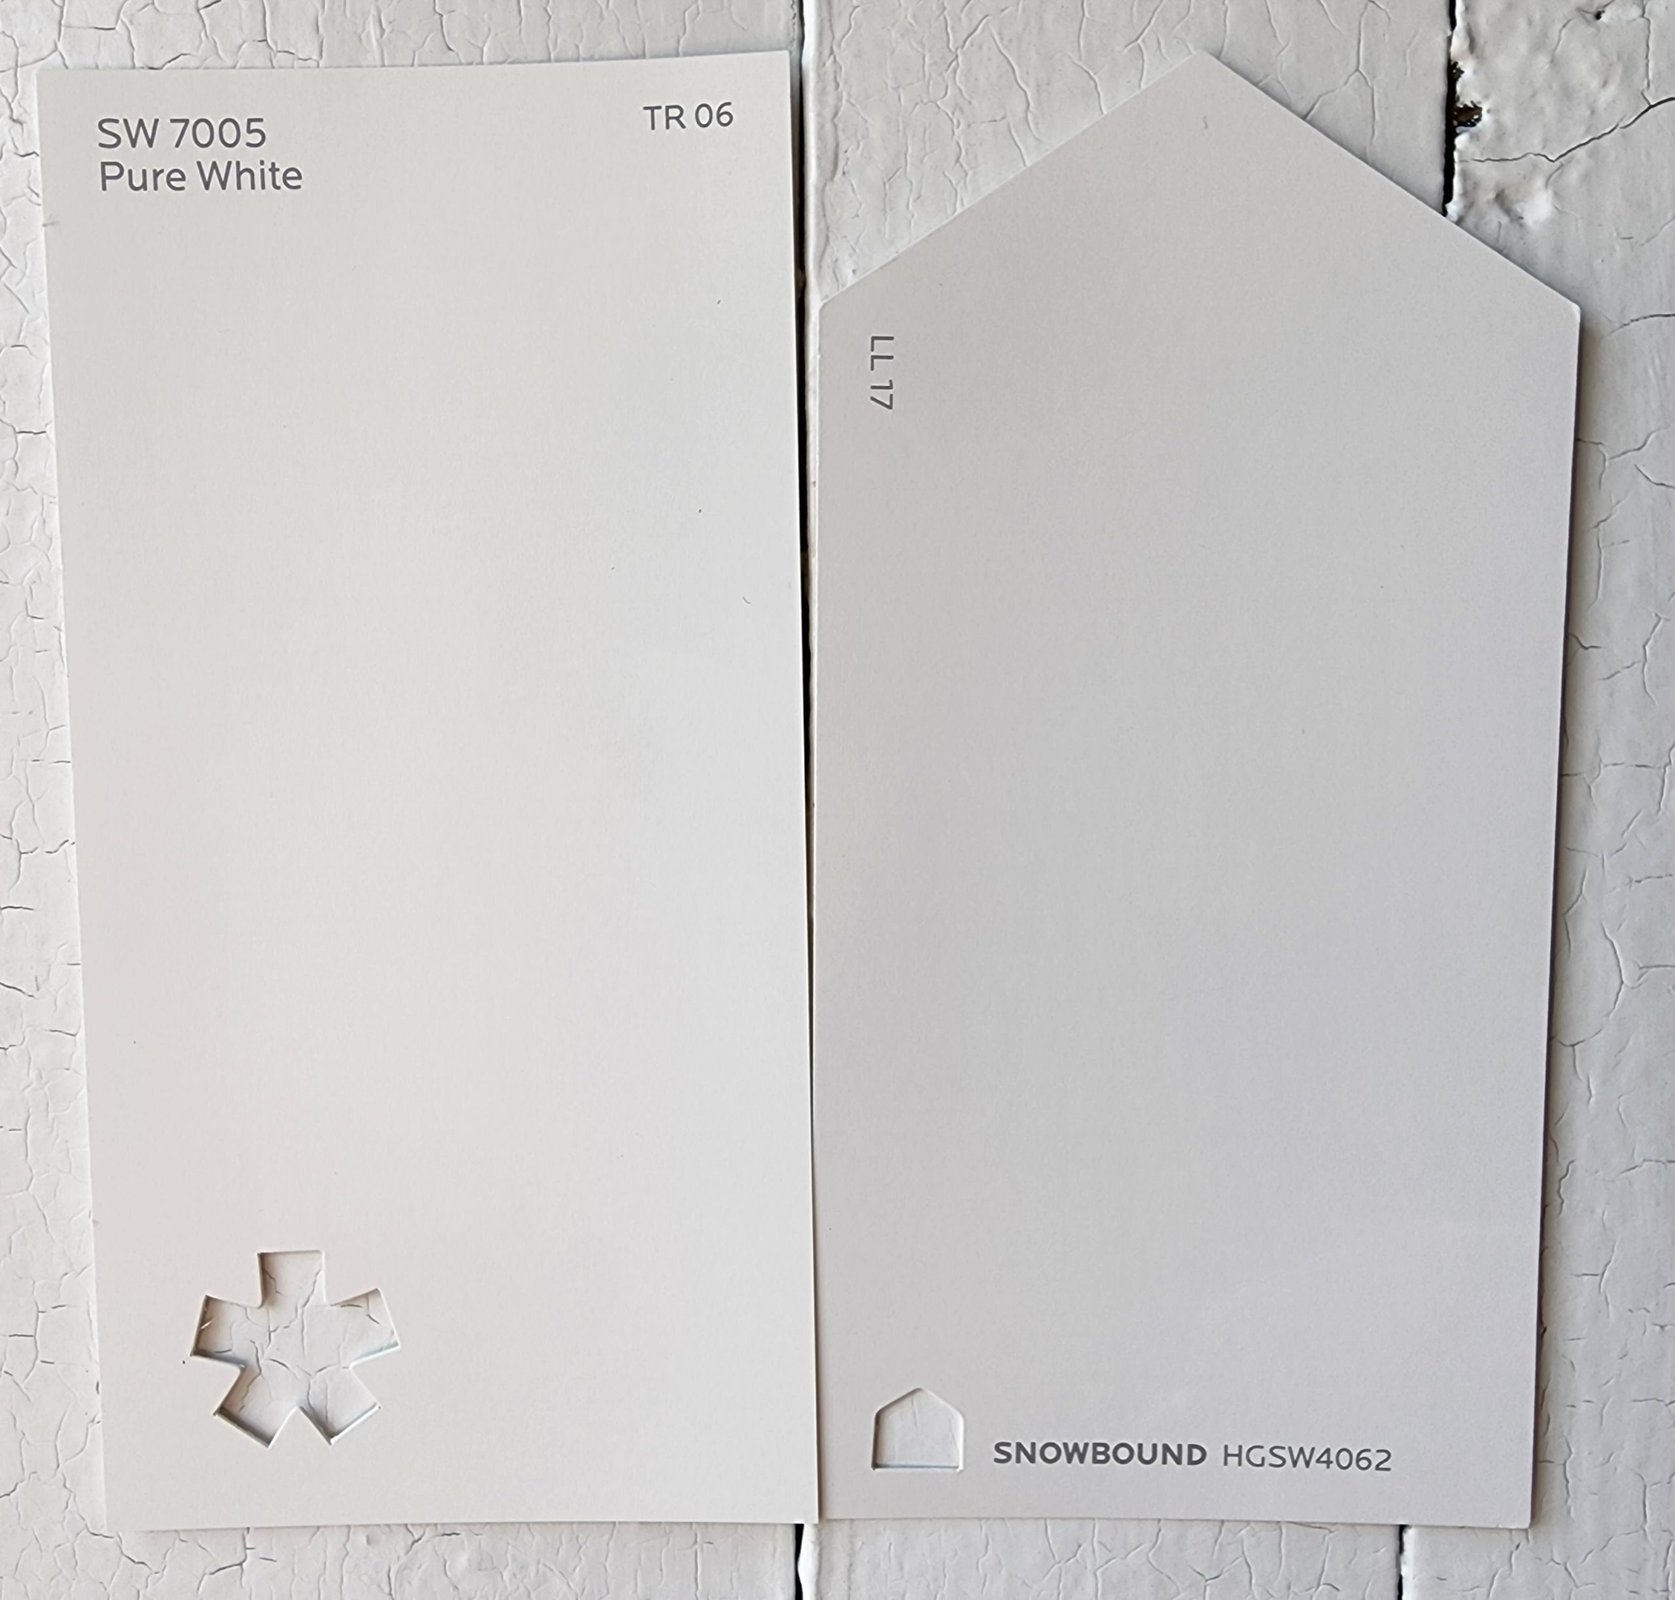  Pure White vs Snowbound by Sherwin Williams scaled